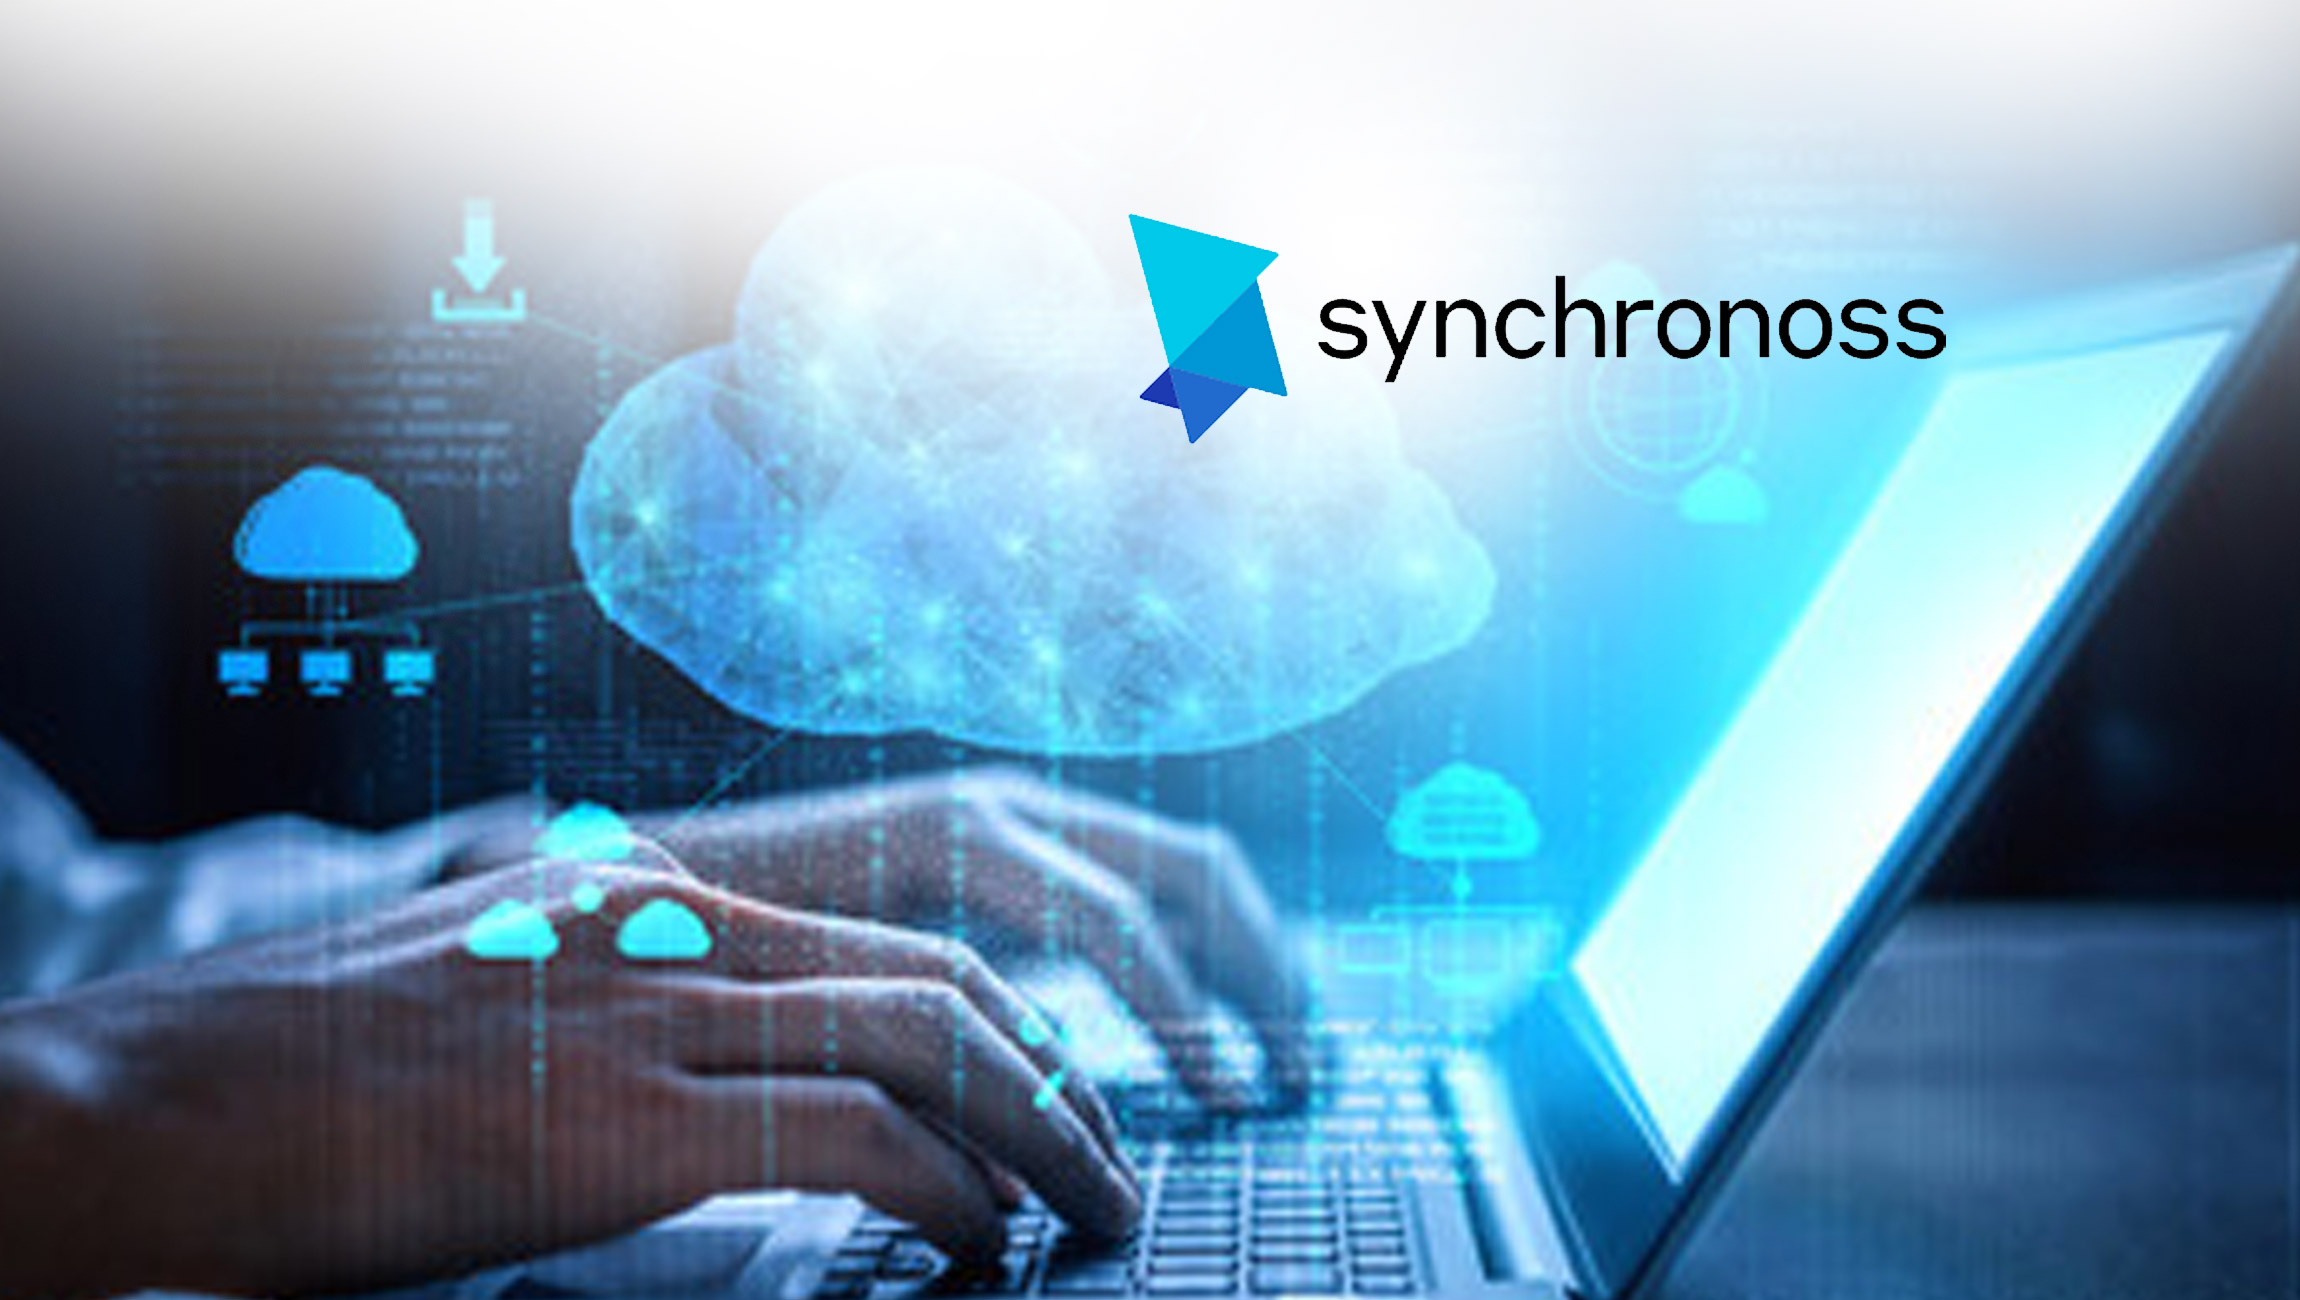 Synchronoss to Power Telkomsigma’s Launch of Two New Premium Personal Cloud Solutions in Indonesia